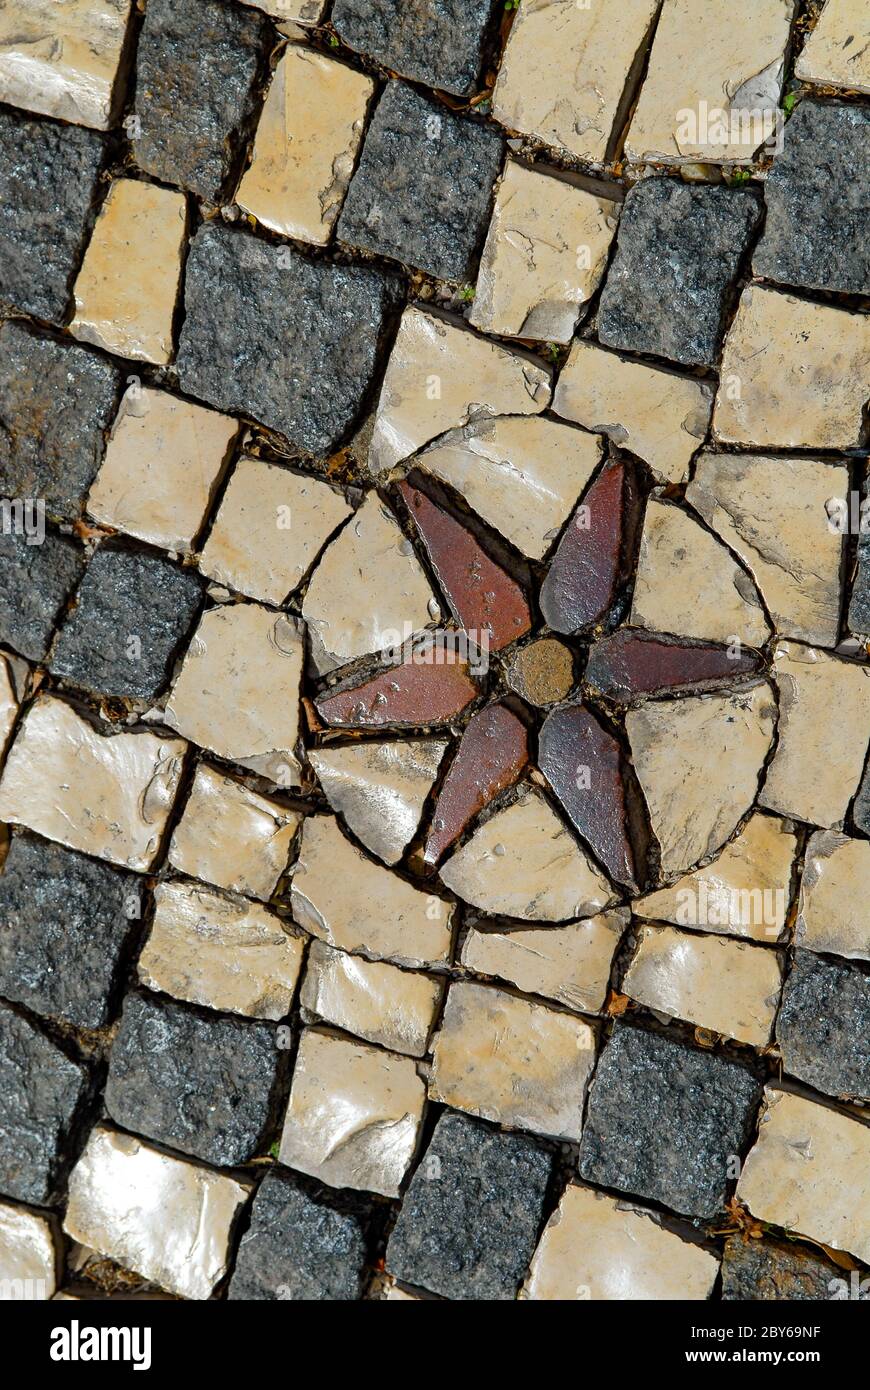 mosaic pavement in the streets of Lisbon in Portugal Stock Photo